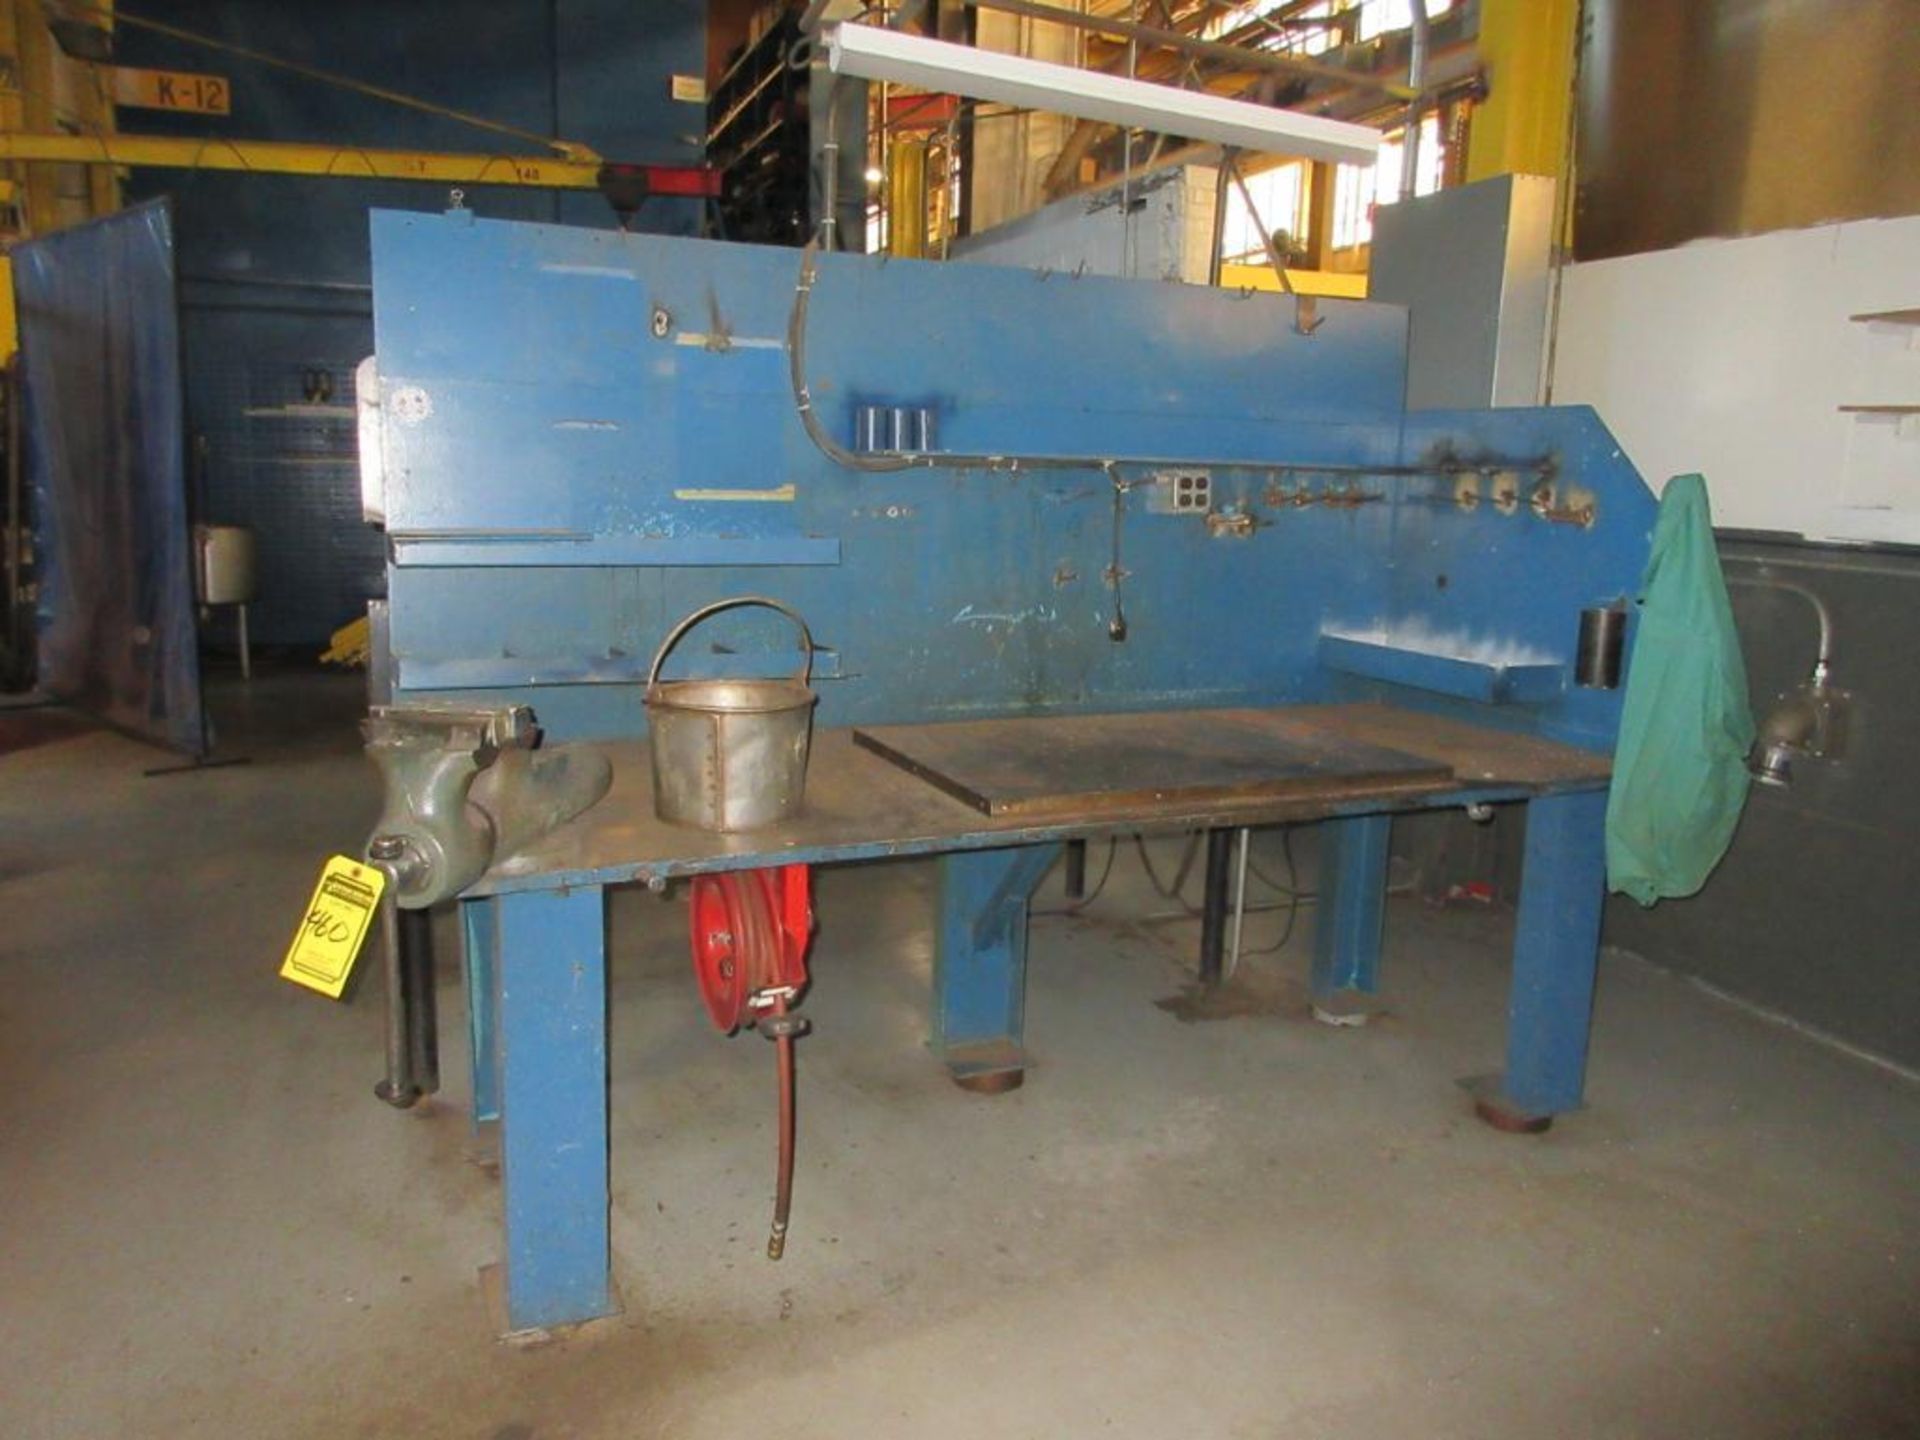 (2) HD WELDING TABLES W/ (2) WILTON 6 IN. VISES, WELDING POSITIONER W/ PACE MASTER SPEED CONTROL, FO - Image 2 of 4